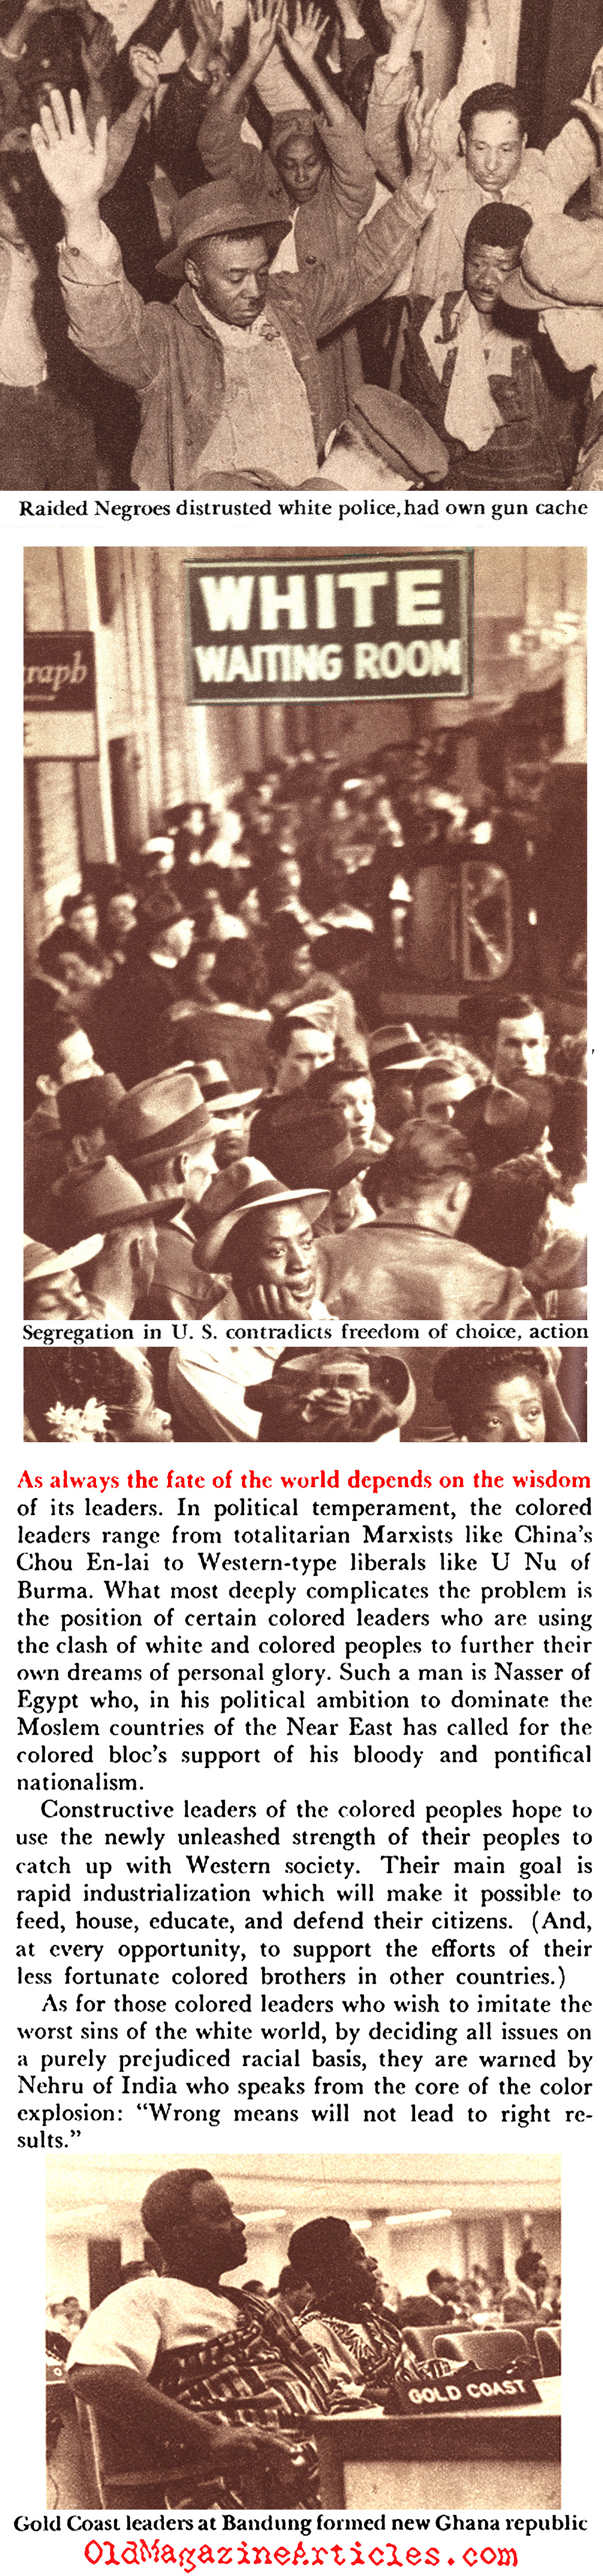 Cold War Politics and People of Color (Pageant Magazine, 1959)